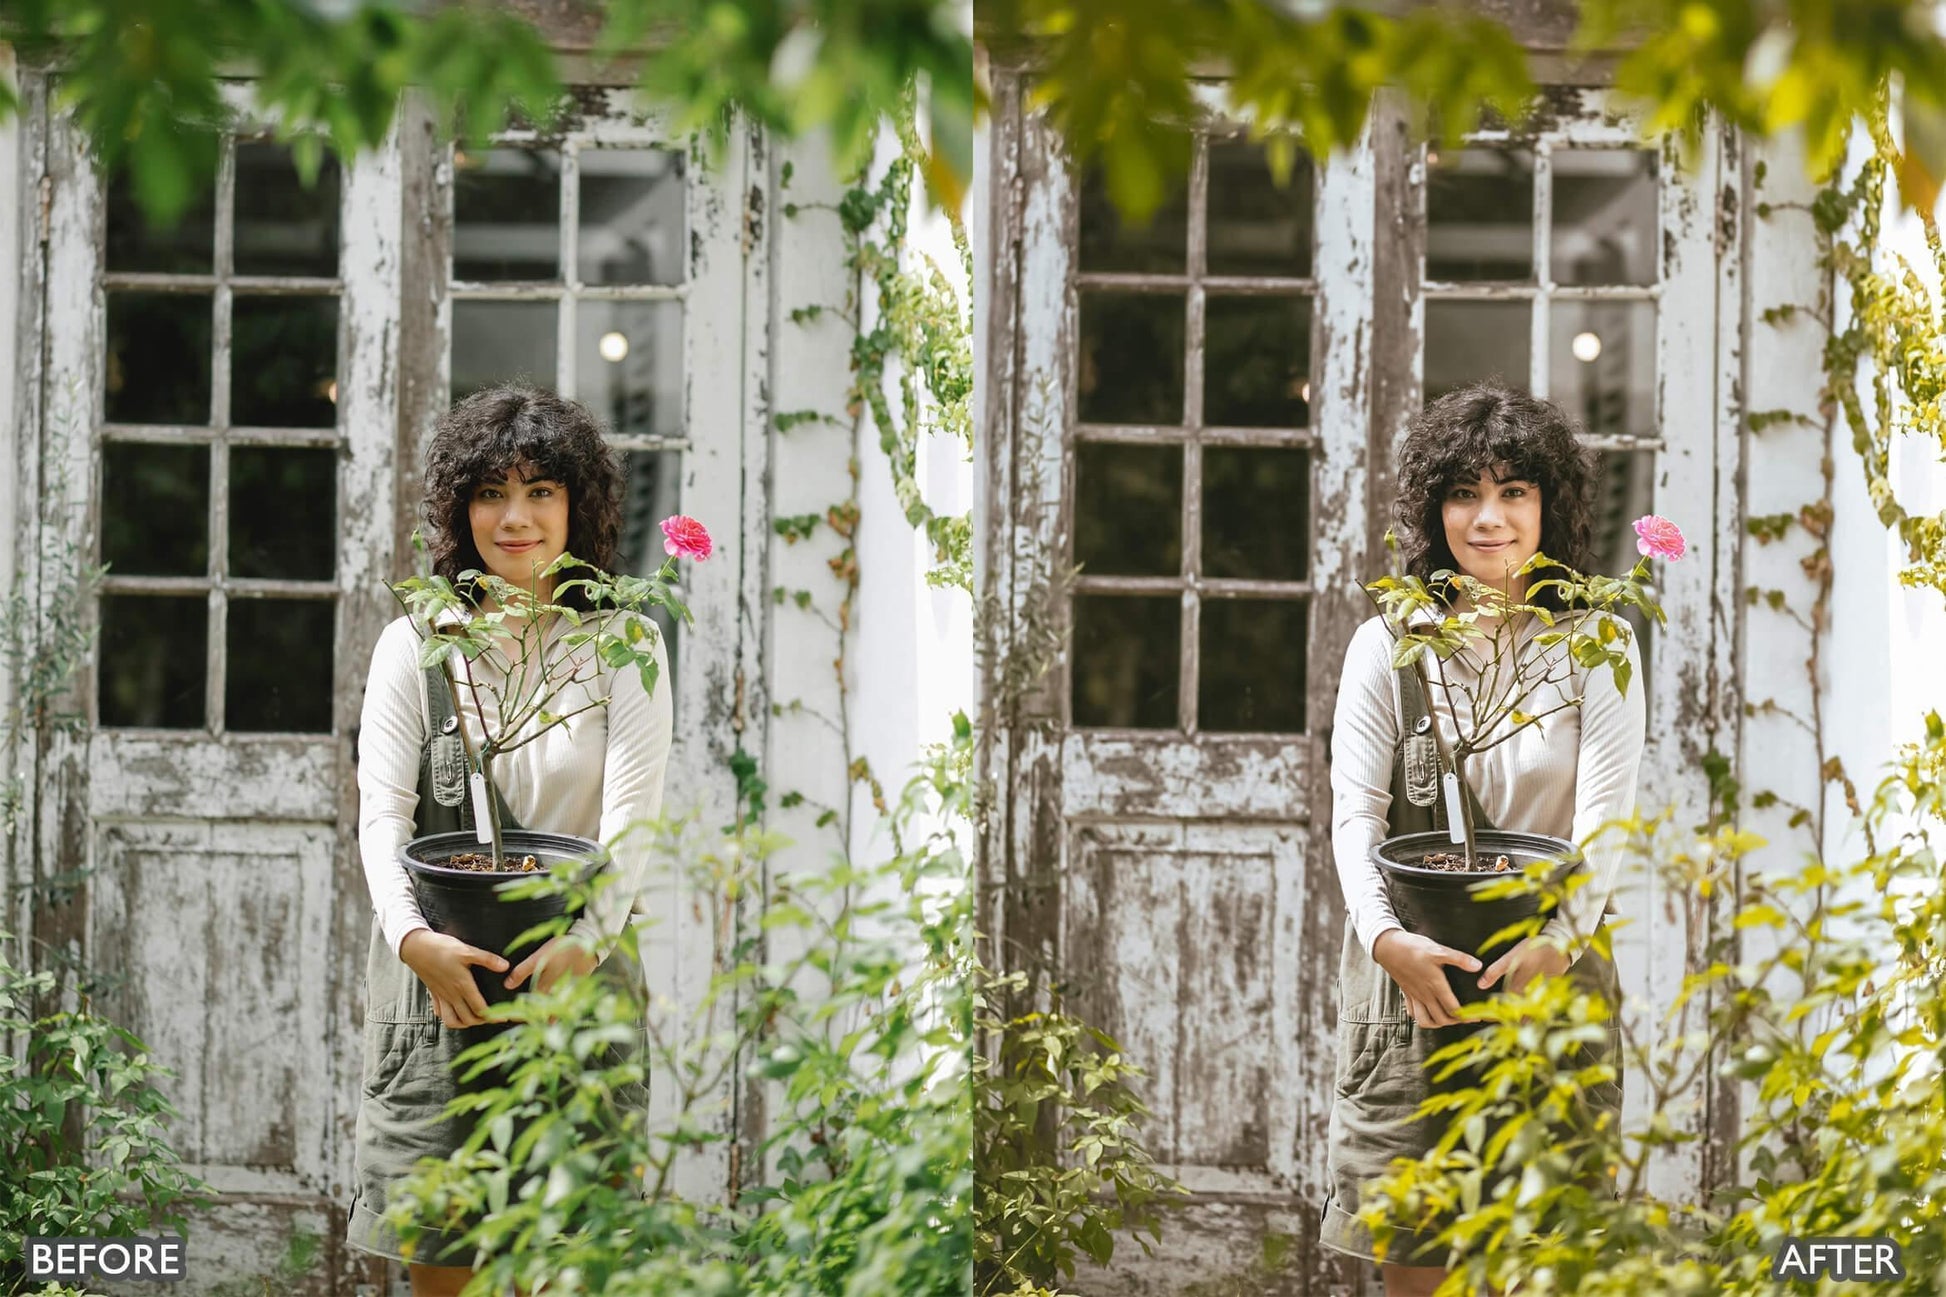 Brown Lightroom Presets For Outdoor Portraits - adobe lightroom presets, Blogger presets, brown presets, Cinematic Presets, cream presets, instagram presets, lightroom presets, moody presets, Portrait presets, presets before and after, professional lightroom presets, Vintage presets - aaapresets.com